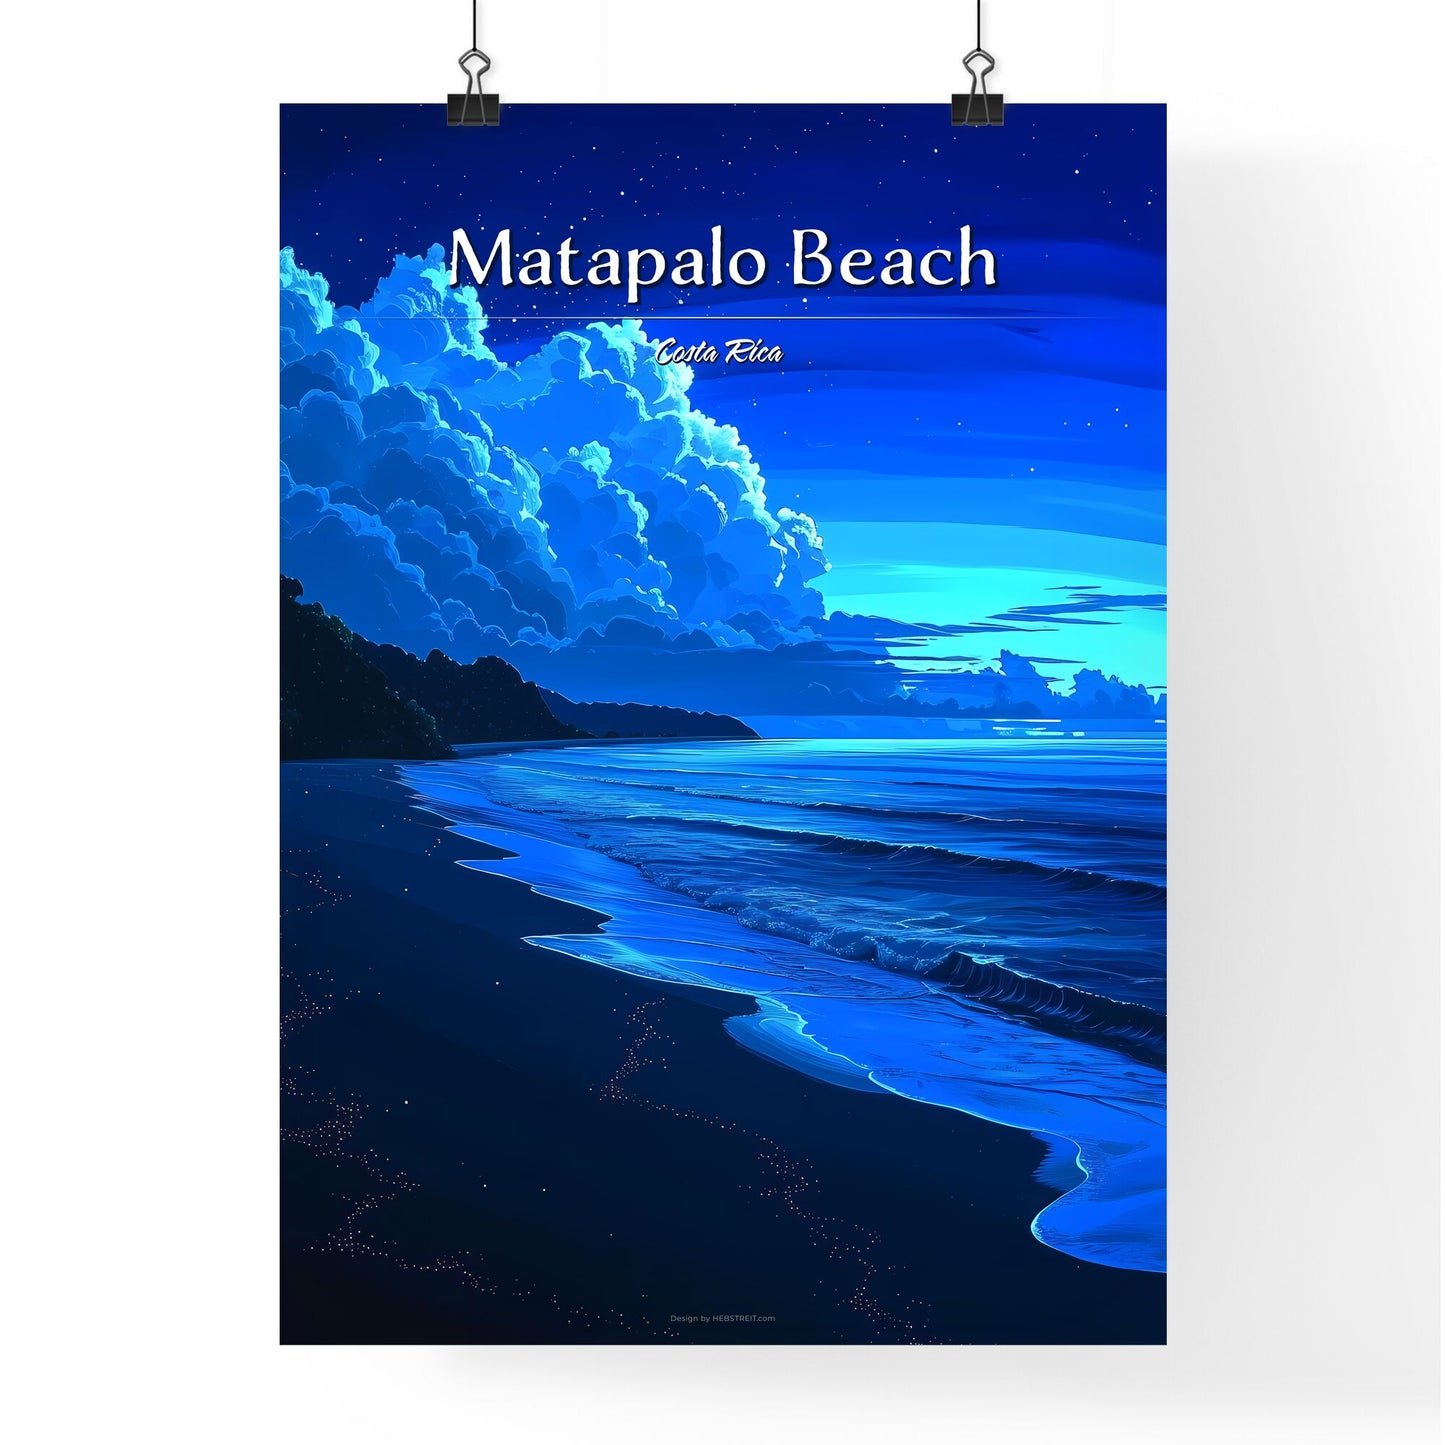 Matapalo Beach, Costa Rica - Art print of a beach at night with clouds and blue sky Default Title